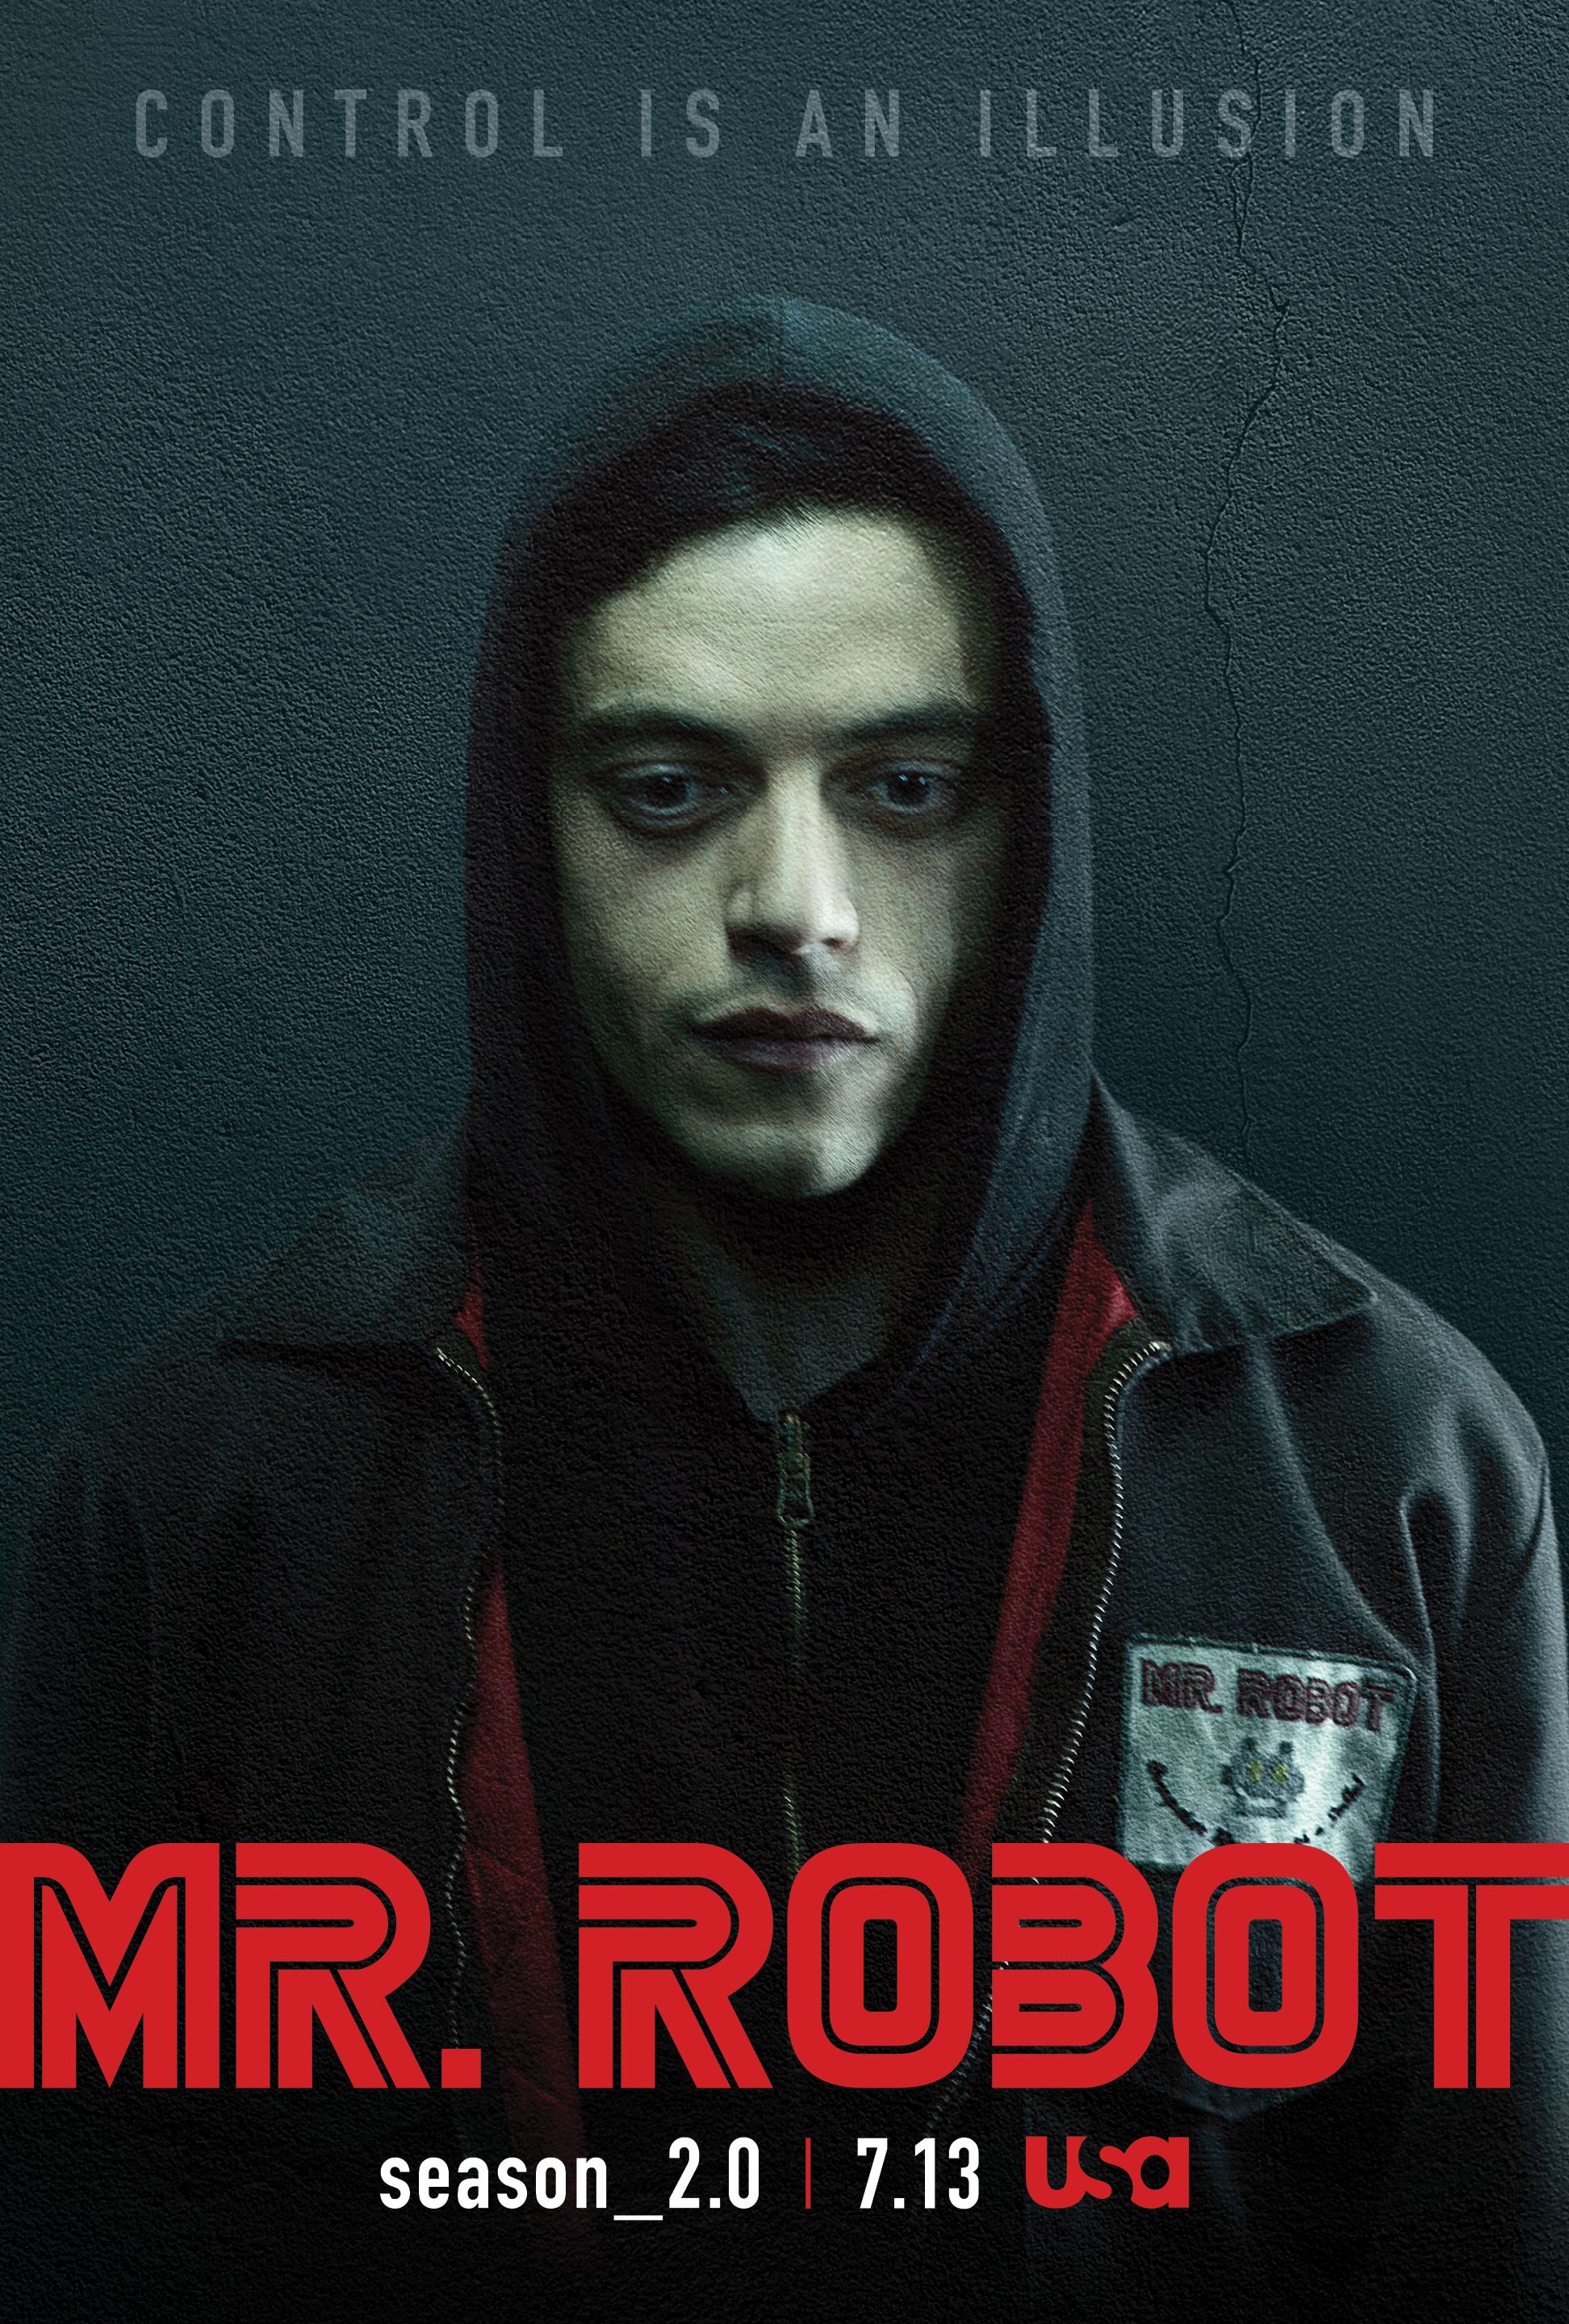 Control is an illusion in the key art released for Mr. Robot